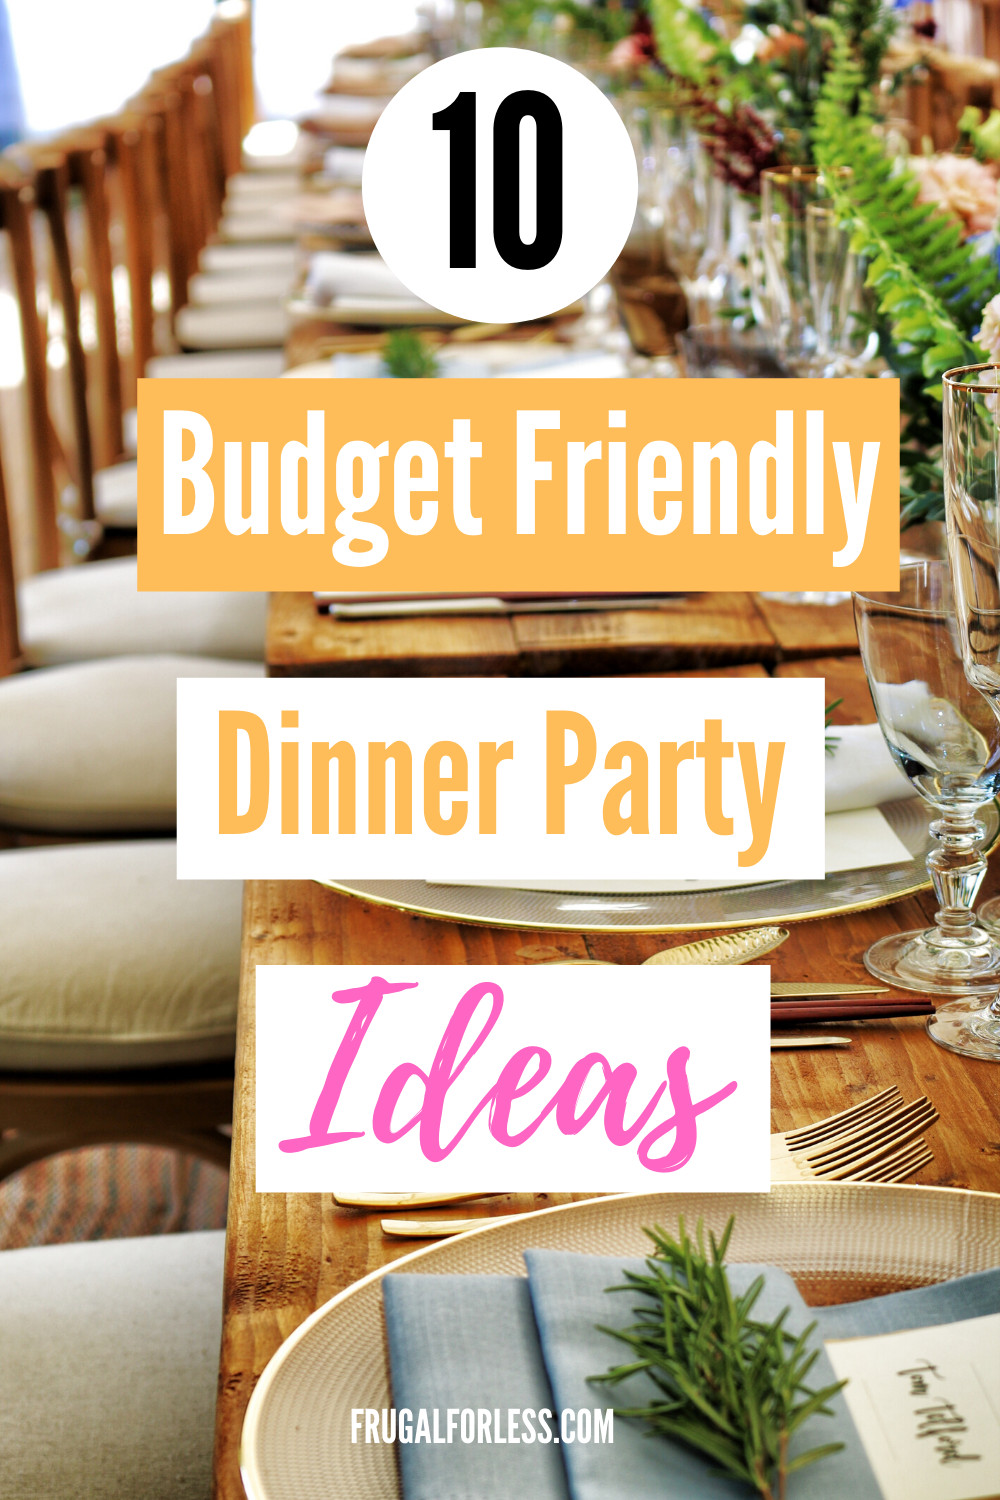 Dinner Party Ideas On A Budget
 10 Bud Friendly Dinner Party Ideas That Will Wow Your